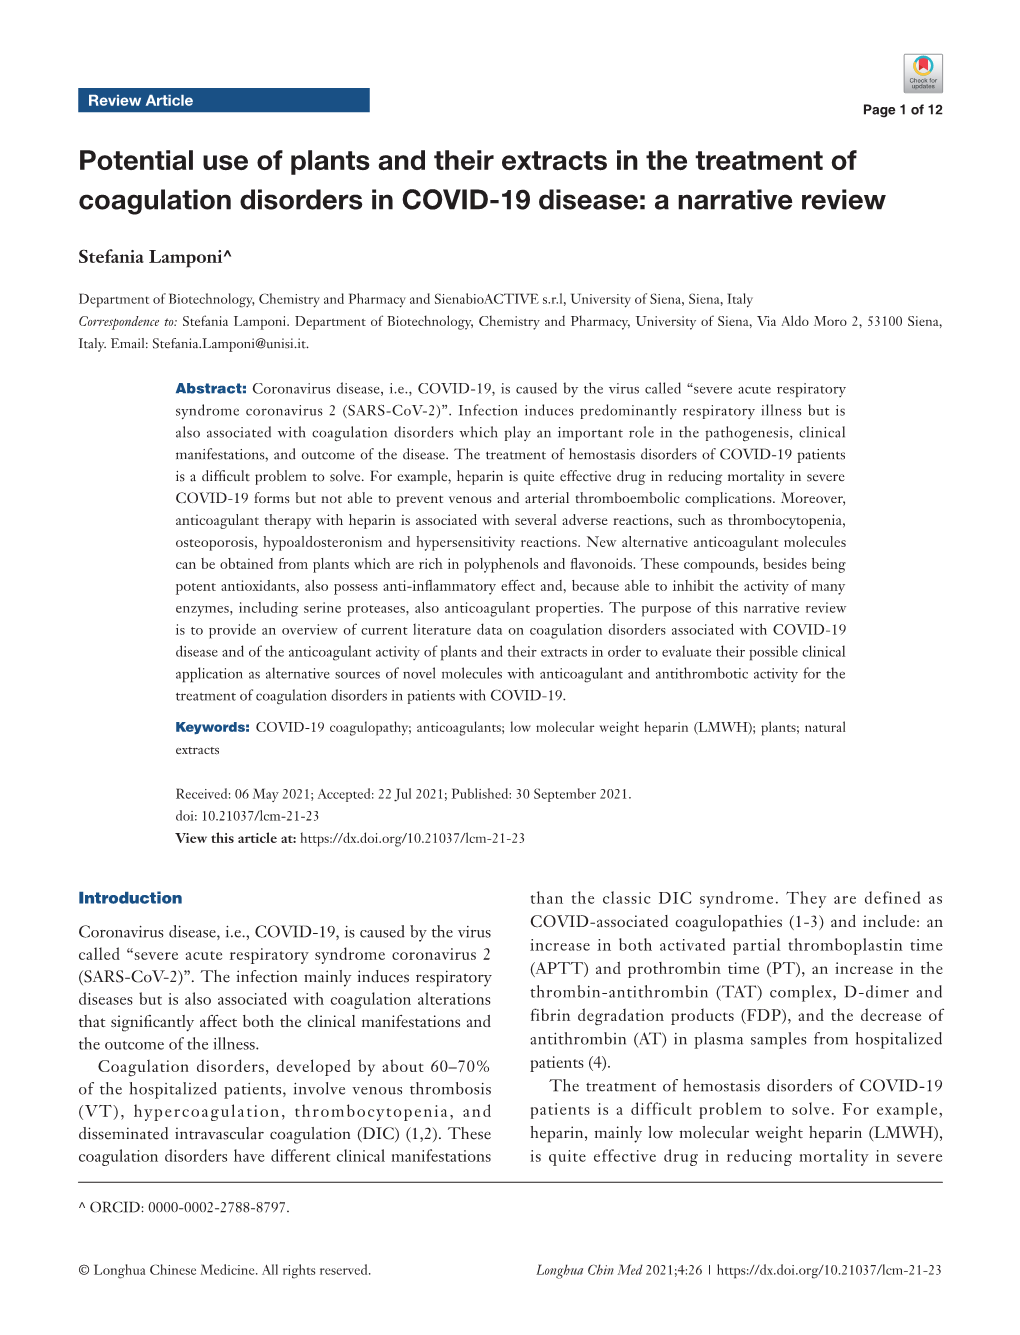 Potential Use of Plants and Their Extracts in the Treatment of Coagulation Disorders in COVID-19 Disease: a Narrative Review